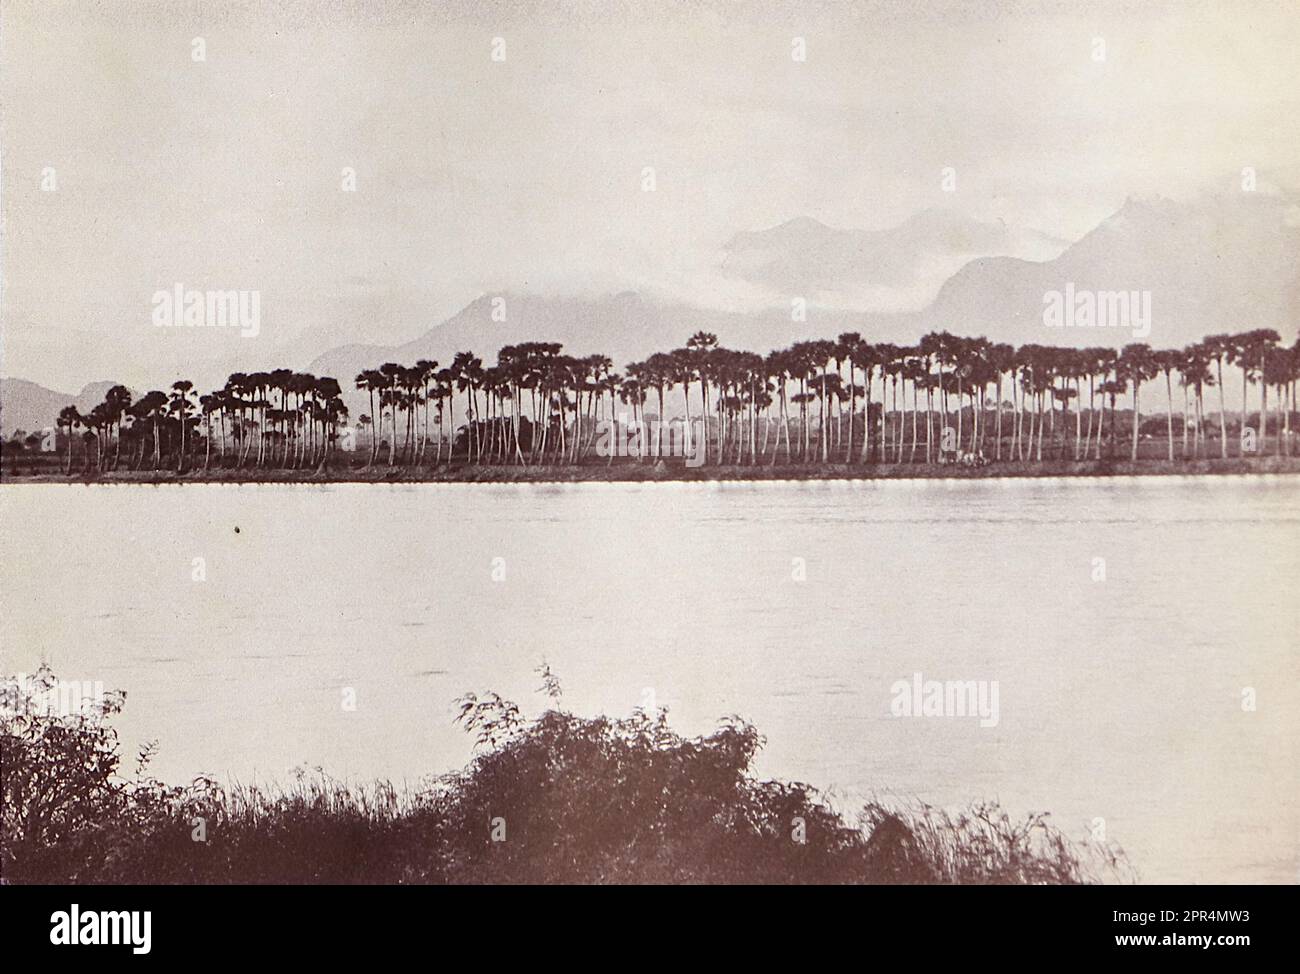 The Red Lake. Water, palm trees on the lake with mountains in the background. Half-tone engraving from a photograph by Mr. Penn of Ootacamund (now known as Ooto), in the Tamil Nadu region of Southern India, c1912. The image relates to the Church of England Zenana Mission’s nursery and compound in Dohnavur, also in Tamil Nadu and about thirty miles from the southern tip of India. The compound was run by Amy Wilson-Carmichael and sought to promote Christianity among babies and children (at the time only girls, many who were victims of temple prostitution). Stock Photo